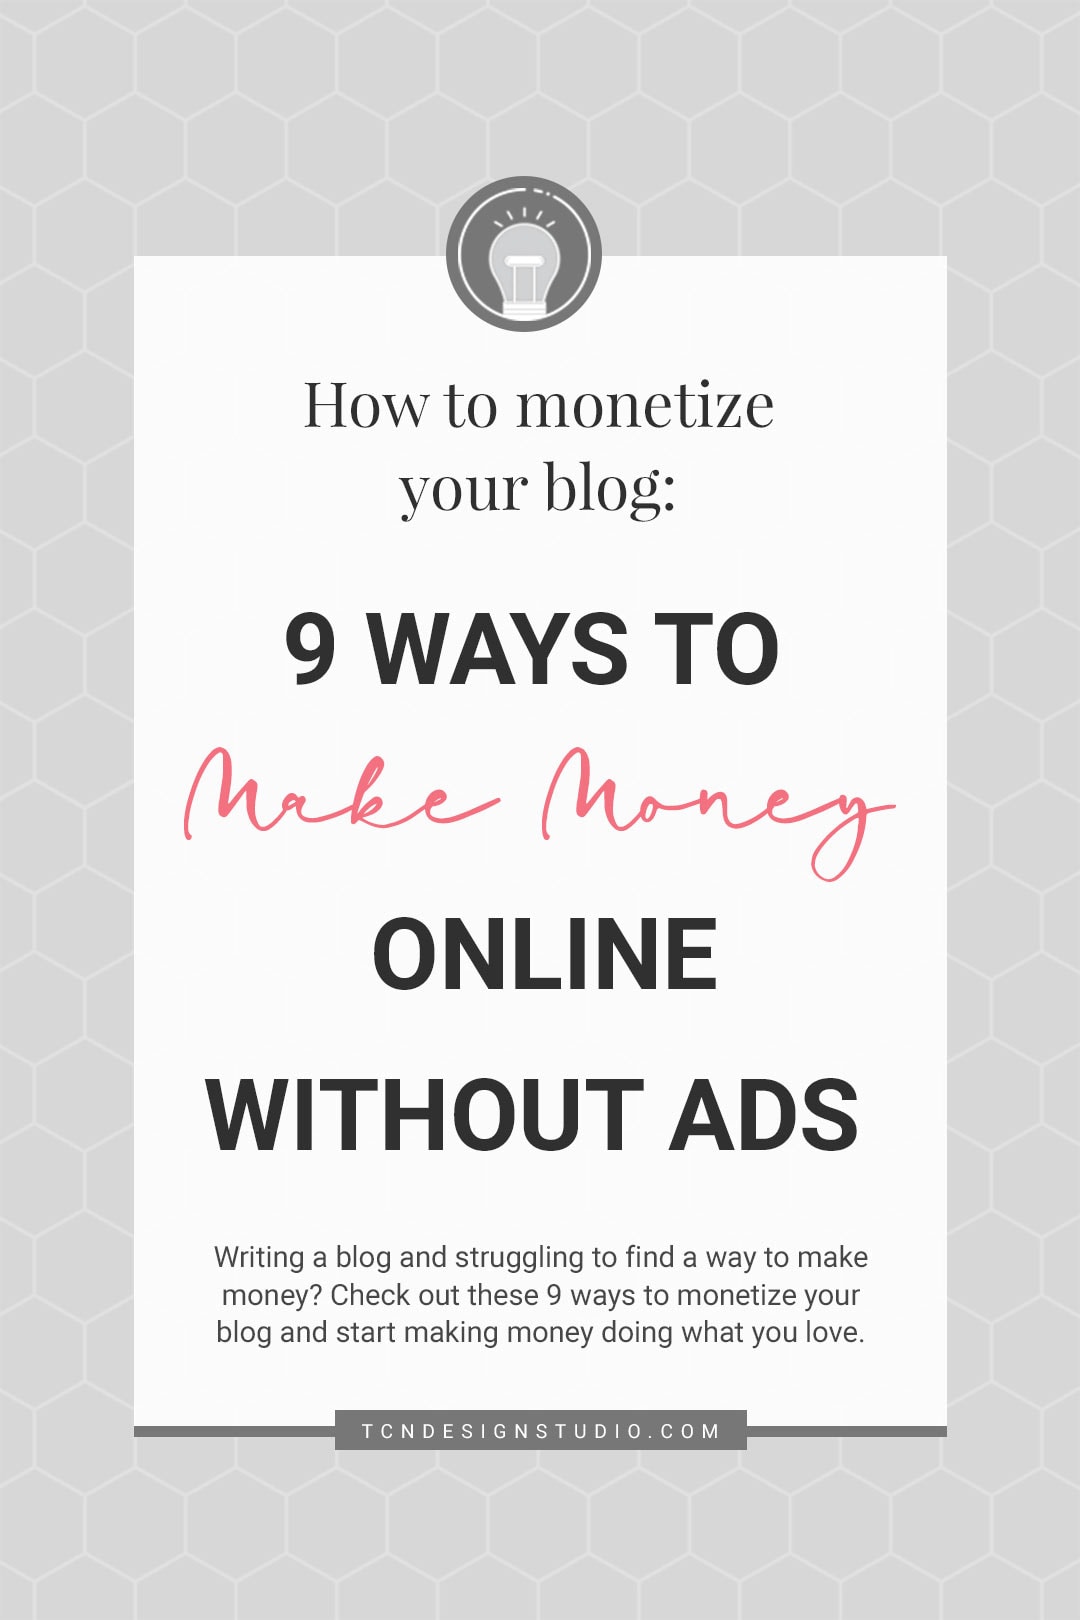 How to Monetize Your Blog: 9 Ways to Make Money Online Without Ads